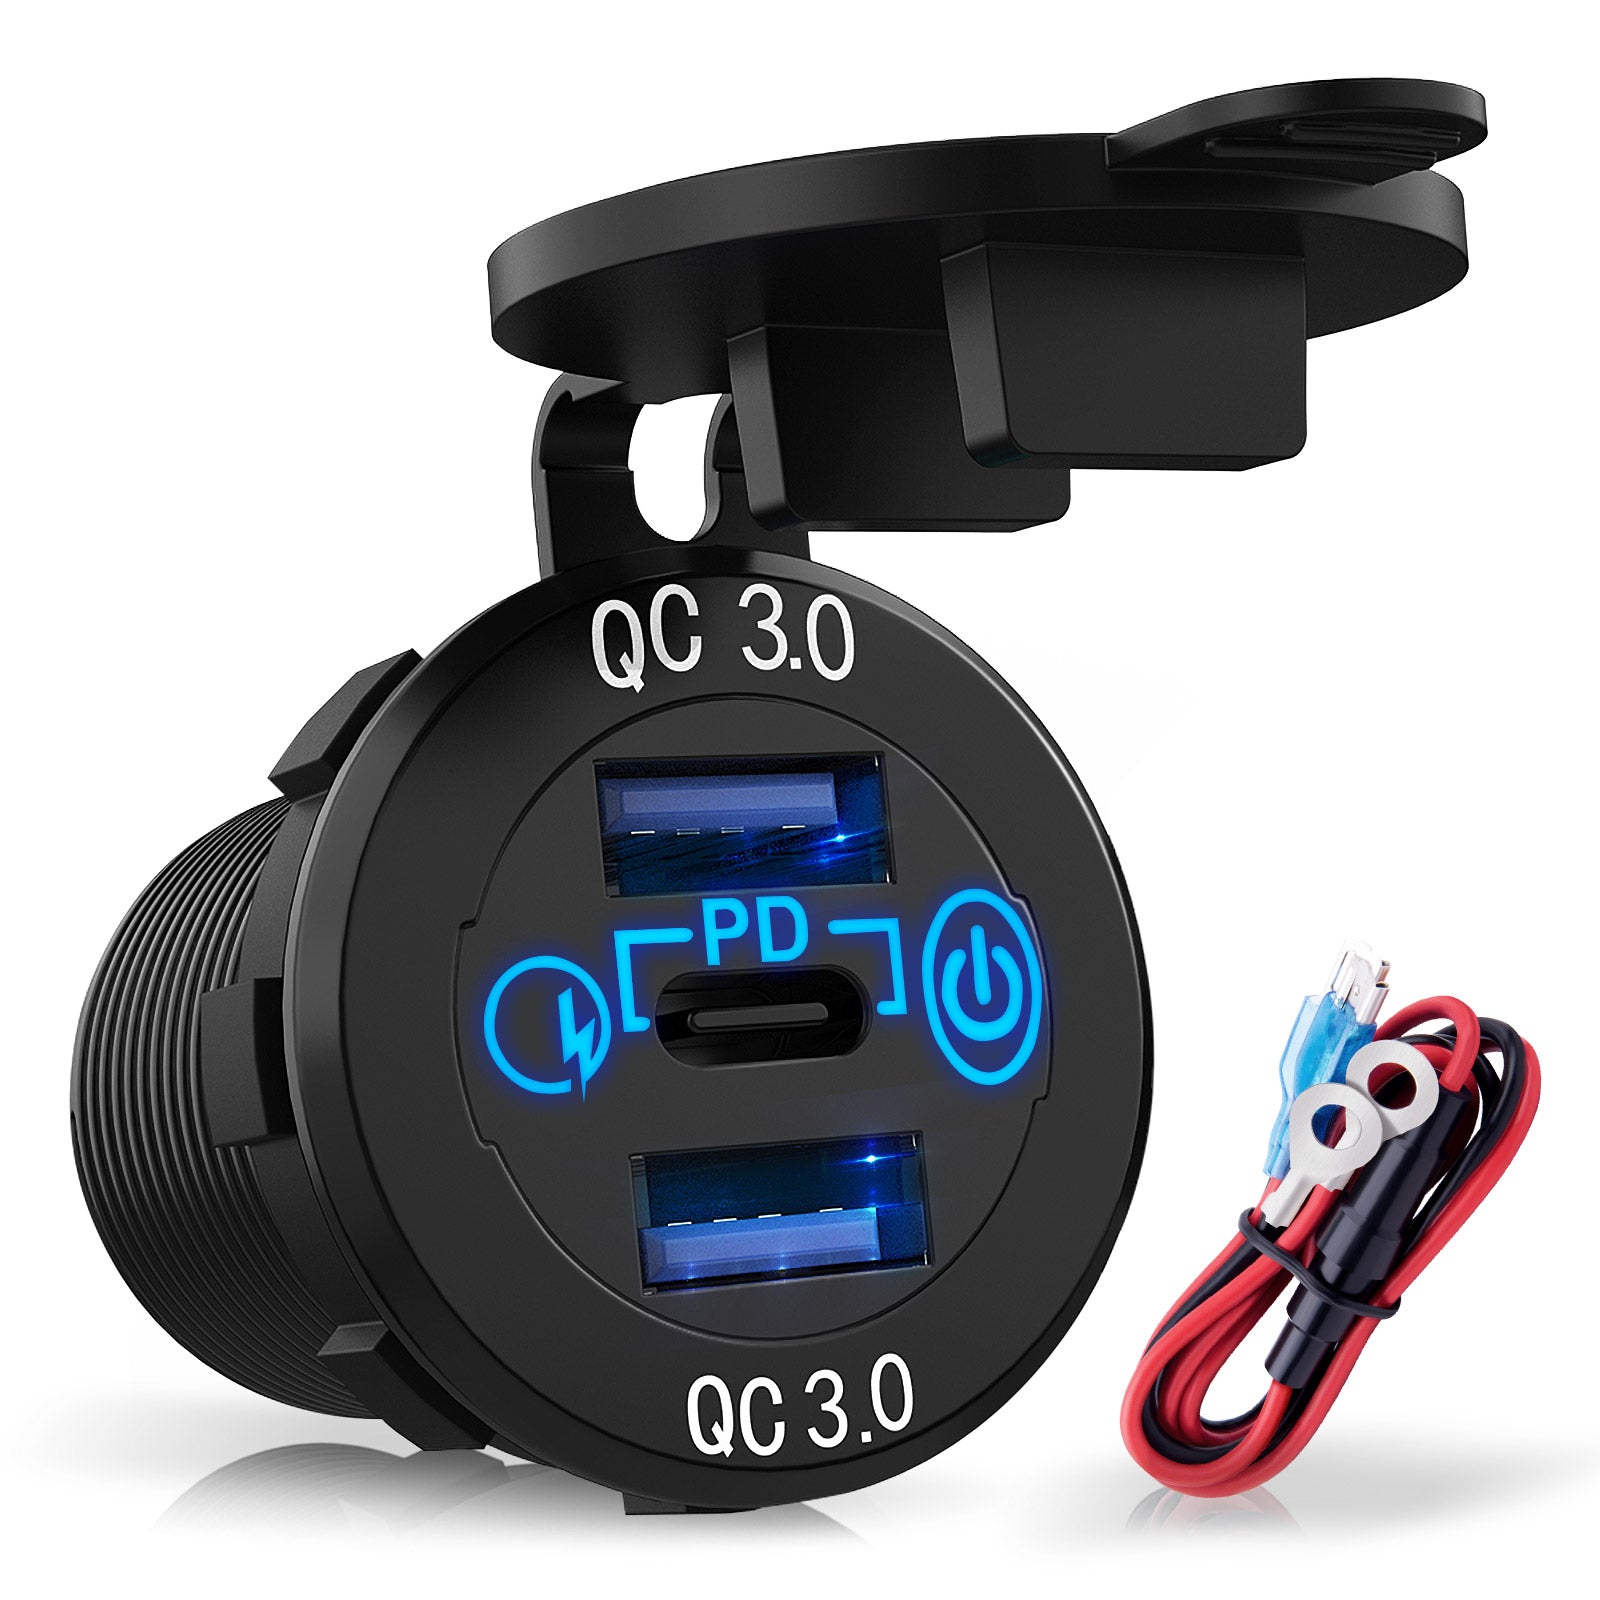 12V USB Outlet, Type C and Quick Charge 3.0 USB Socket, with Colorful  Voltmeter and Switch, 12V/24V Car Power Outlet Waterproof Socket Dual Ports  for